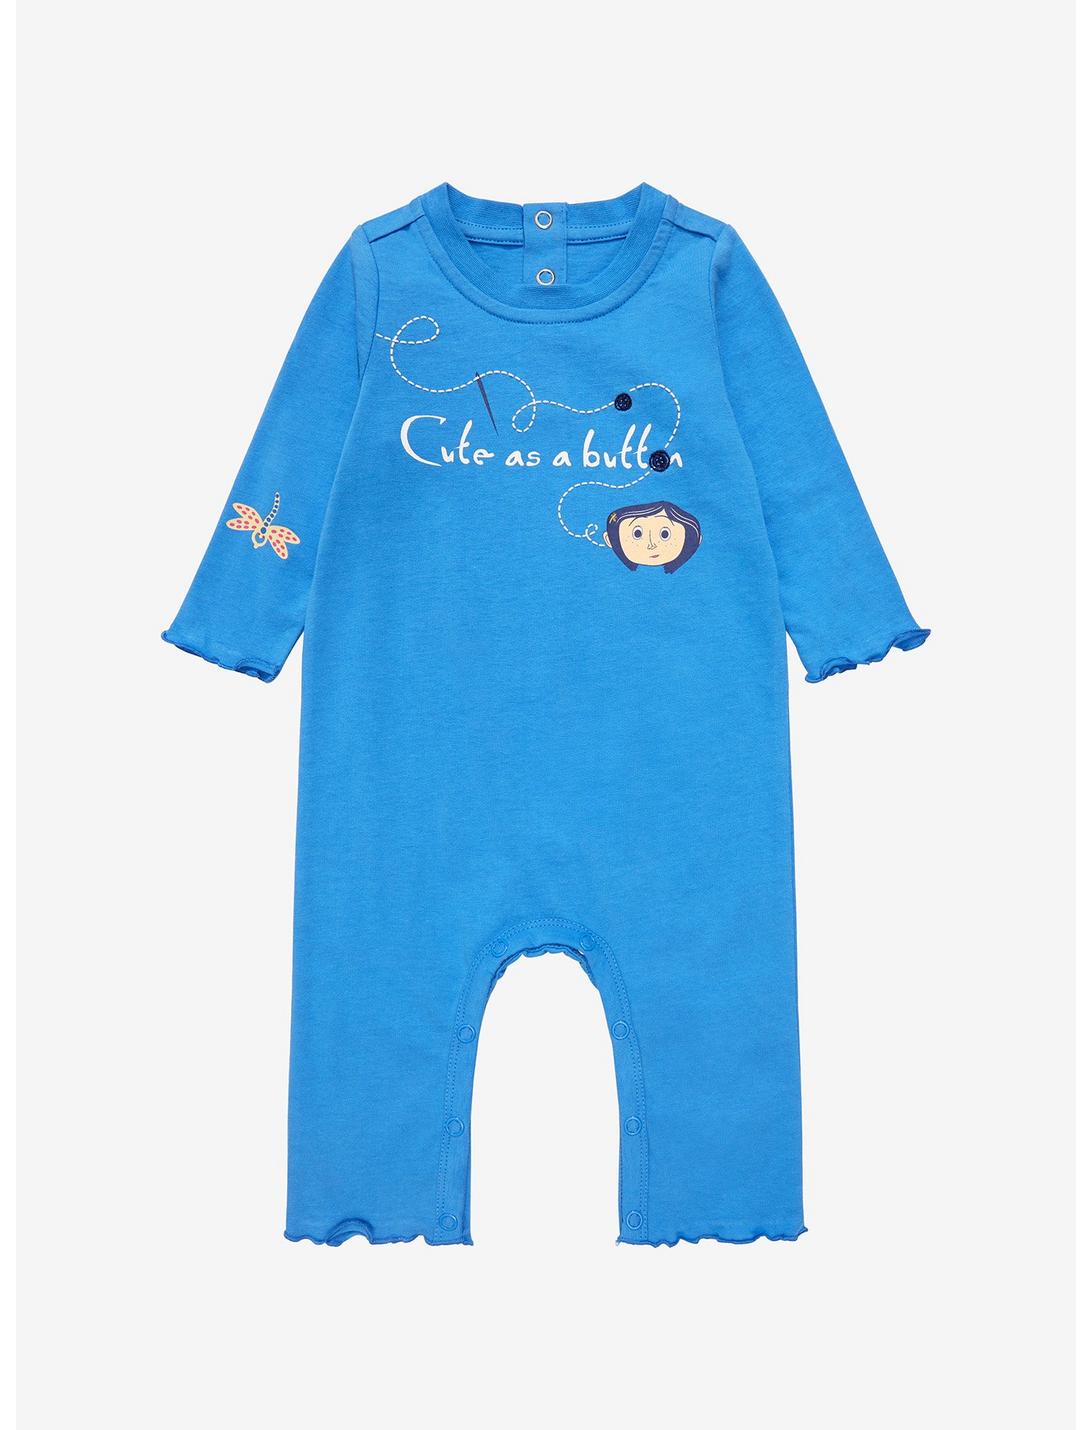 Coraline Cute as a Button Infant One-Piece - BoxLunch Exclusive, LIGHT BLUE, hi-res